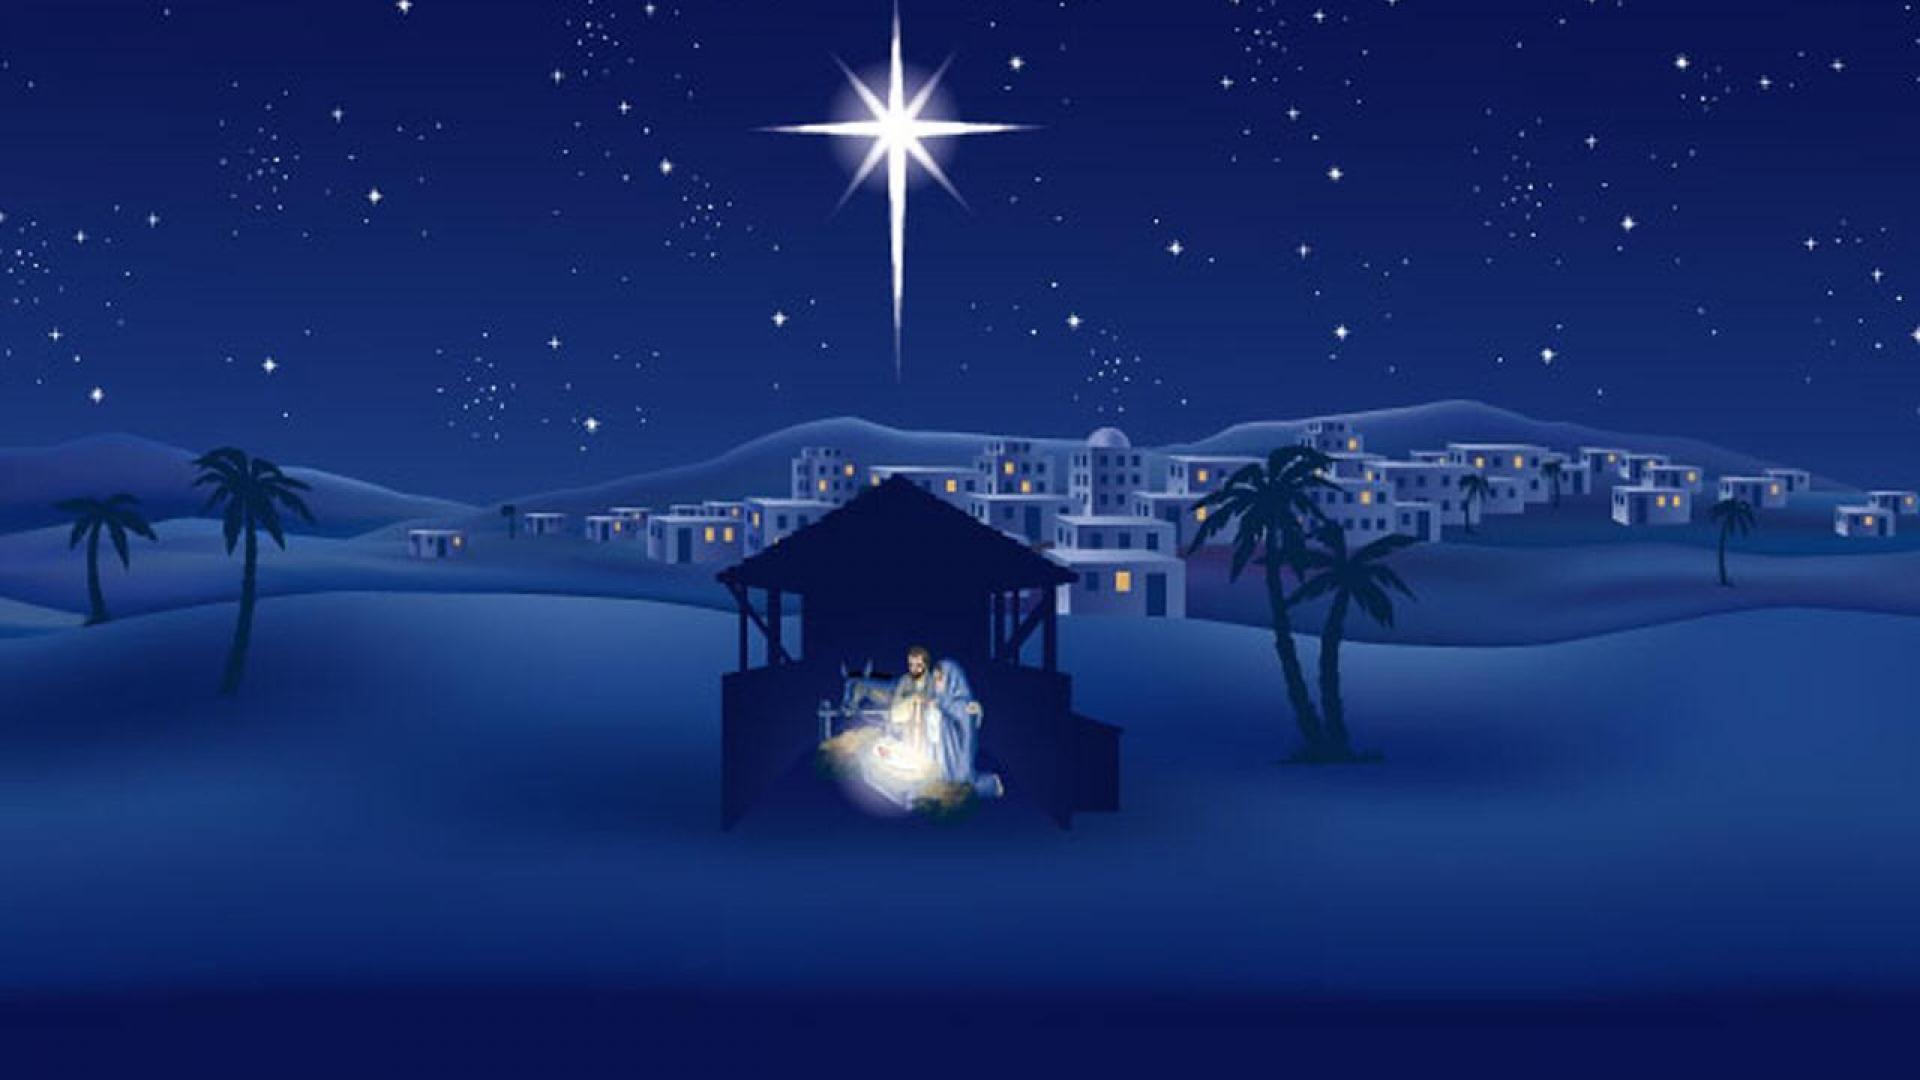 Christmas Wallpaper Nativity Image Pictures Wall